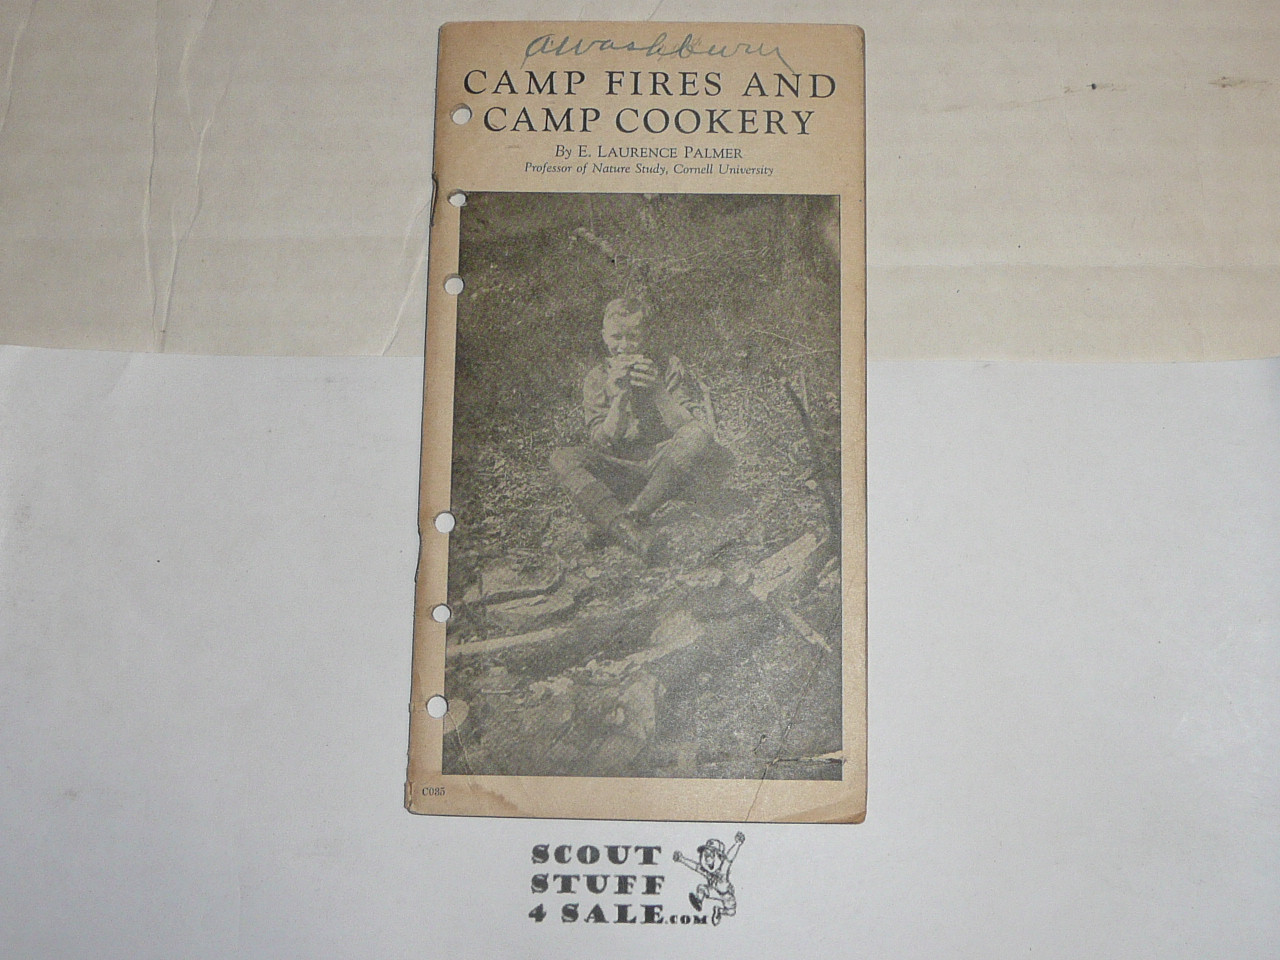 Lefax Boy Scout Fieldbook Insert, Camp Fires and Camp Cookery, 1926 by Comstock Company, 44 pages